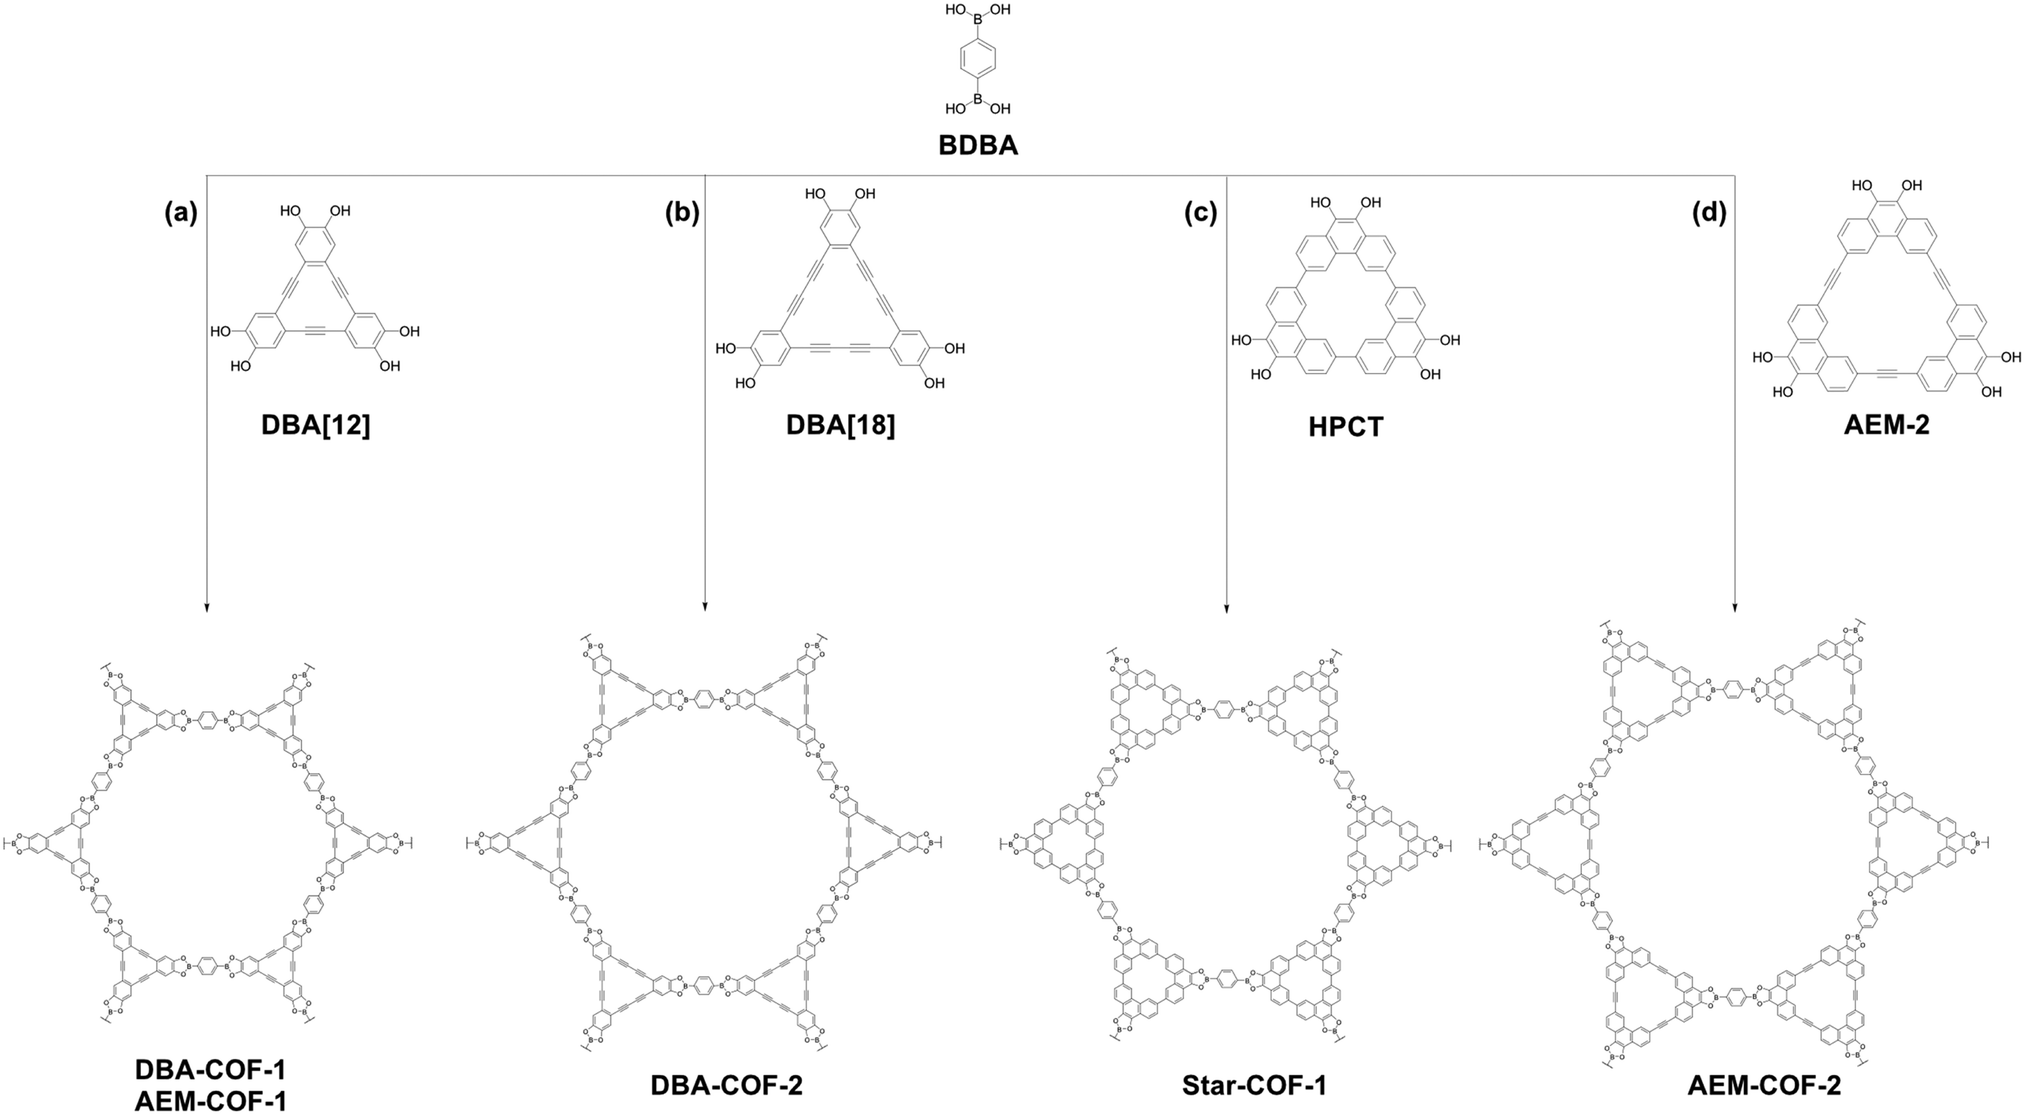 Boronic-acid-derived covalent organic frameworks: from synthesis to  applications - New Journal of Chemistry (RSC Publishing)  DOI:10.1039/D1NJ01269J